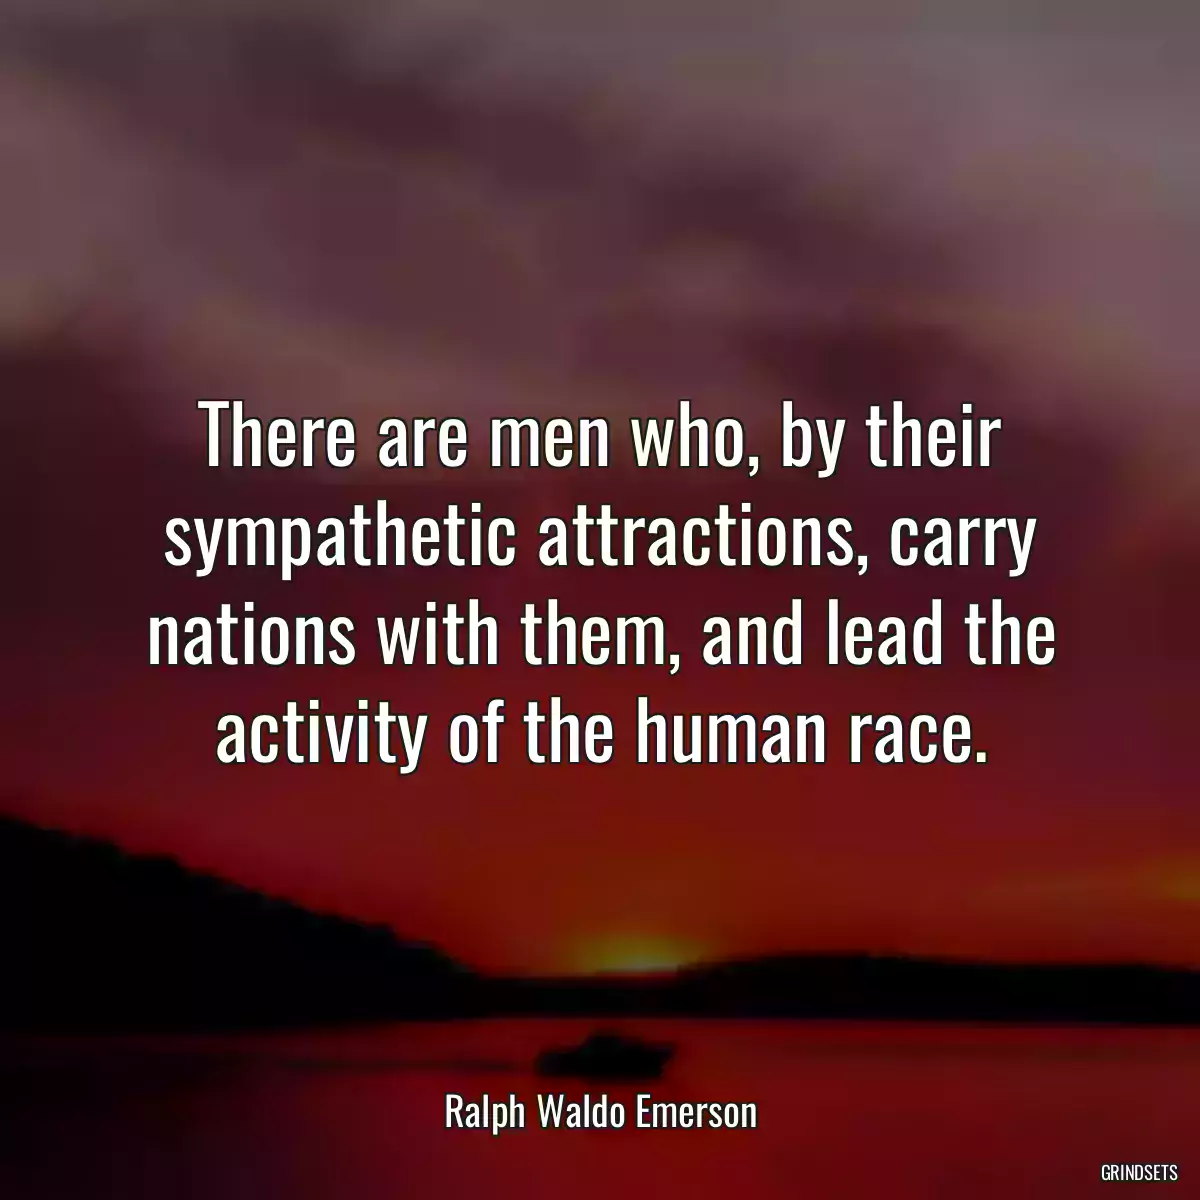 There are men who, by their sympathetic attractions, carry nations with them, and lead the activity of the human race.